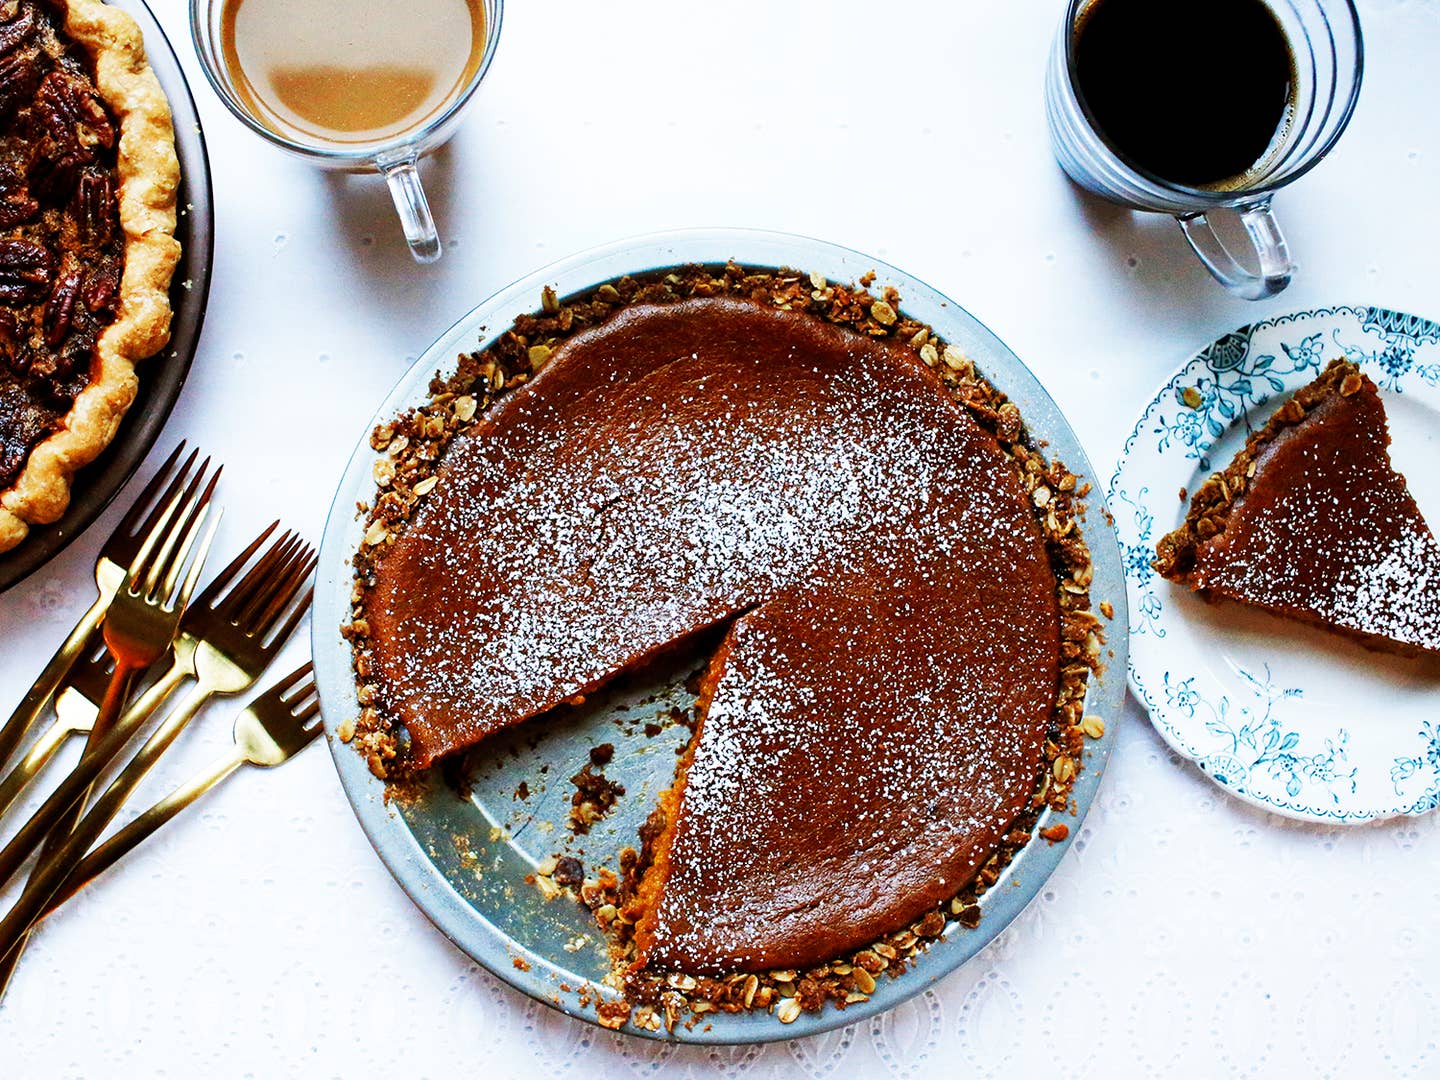 This Last-Minute Pumpkin Pie Will Save Your Thanksgiving